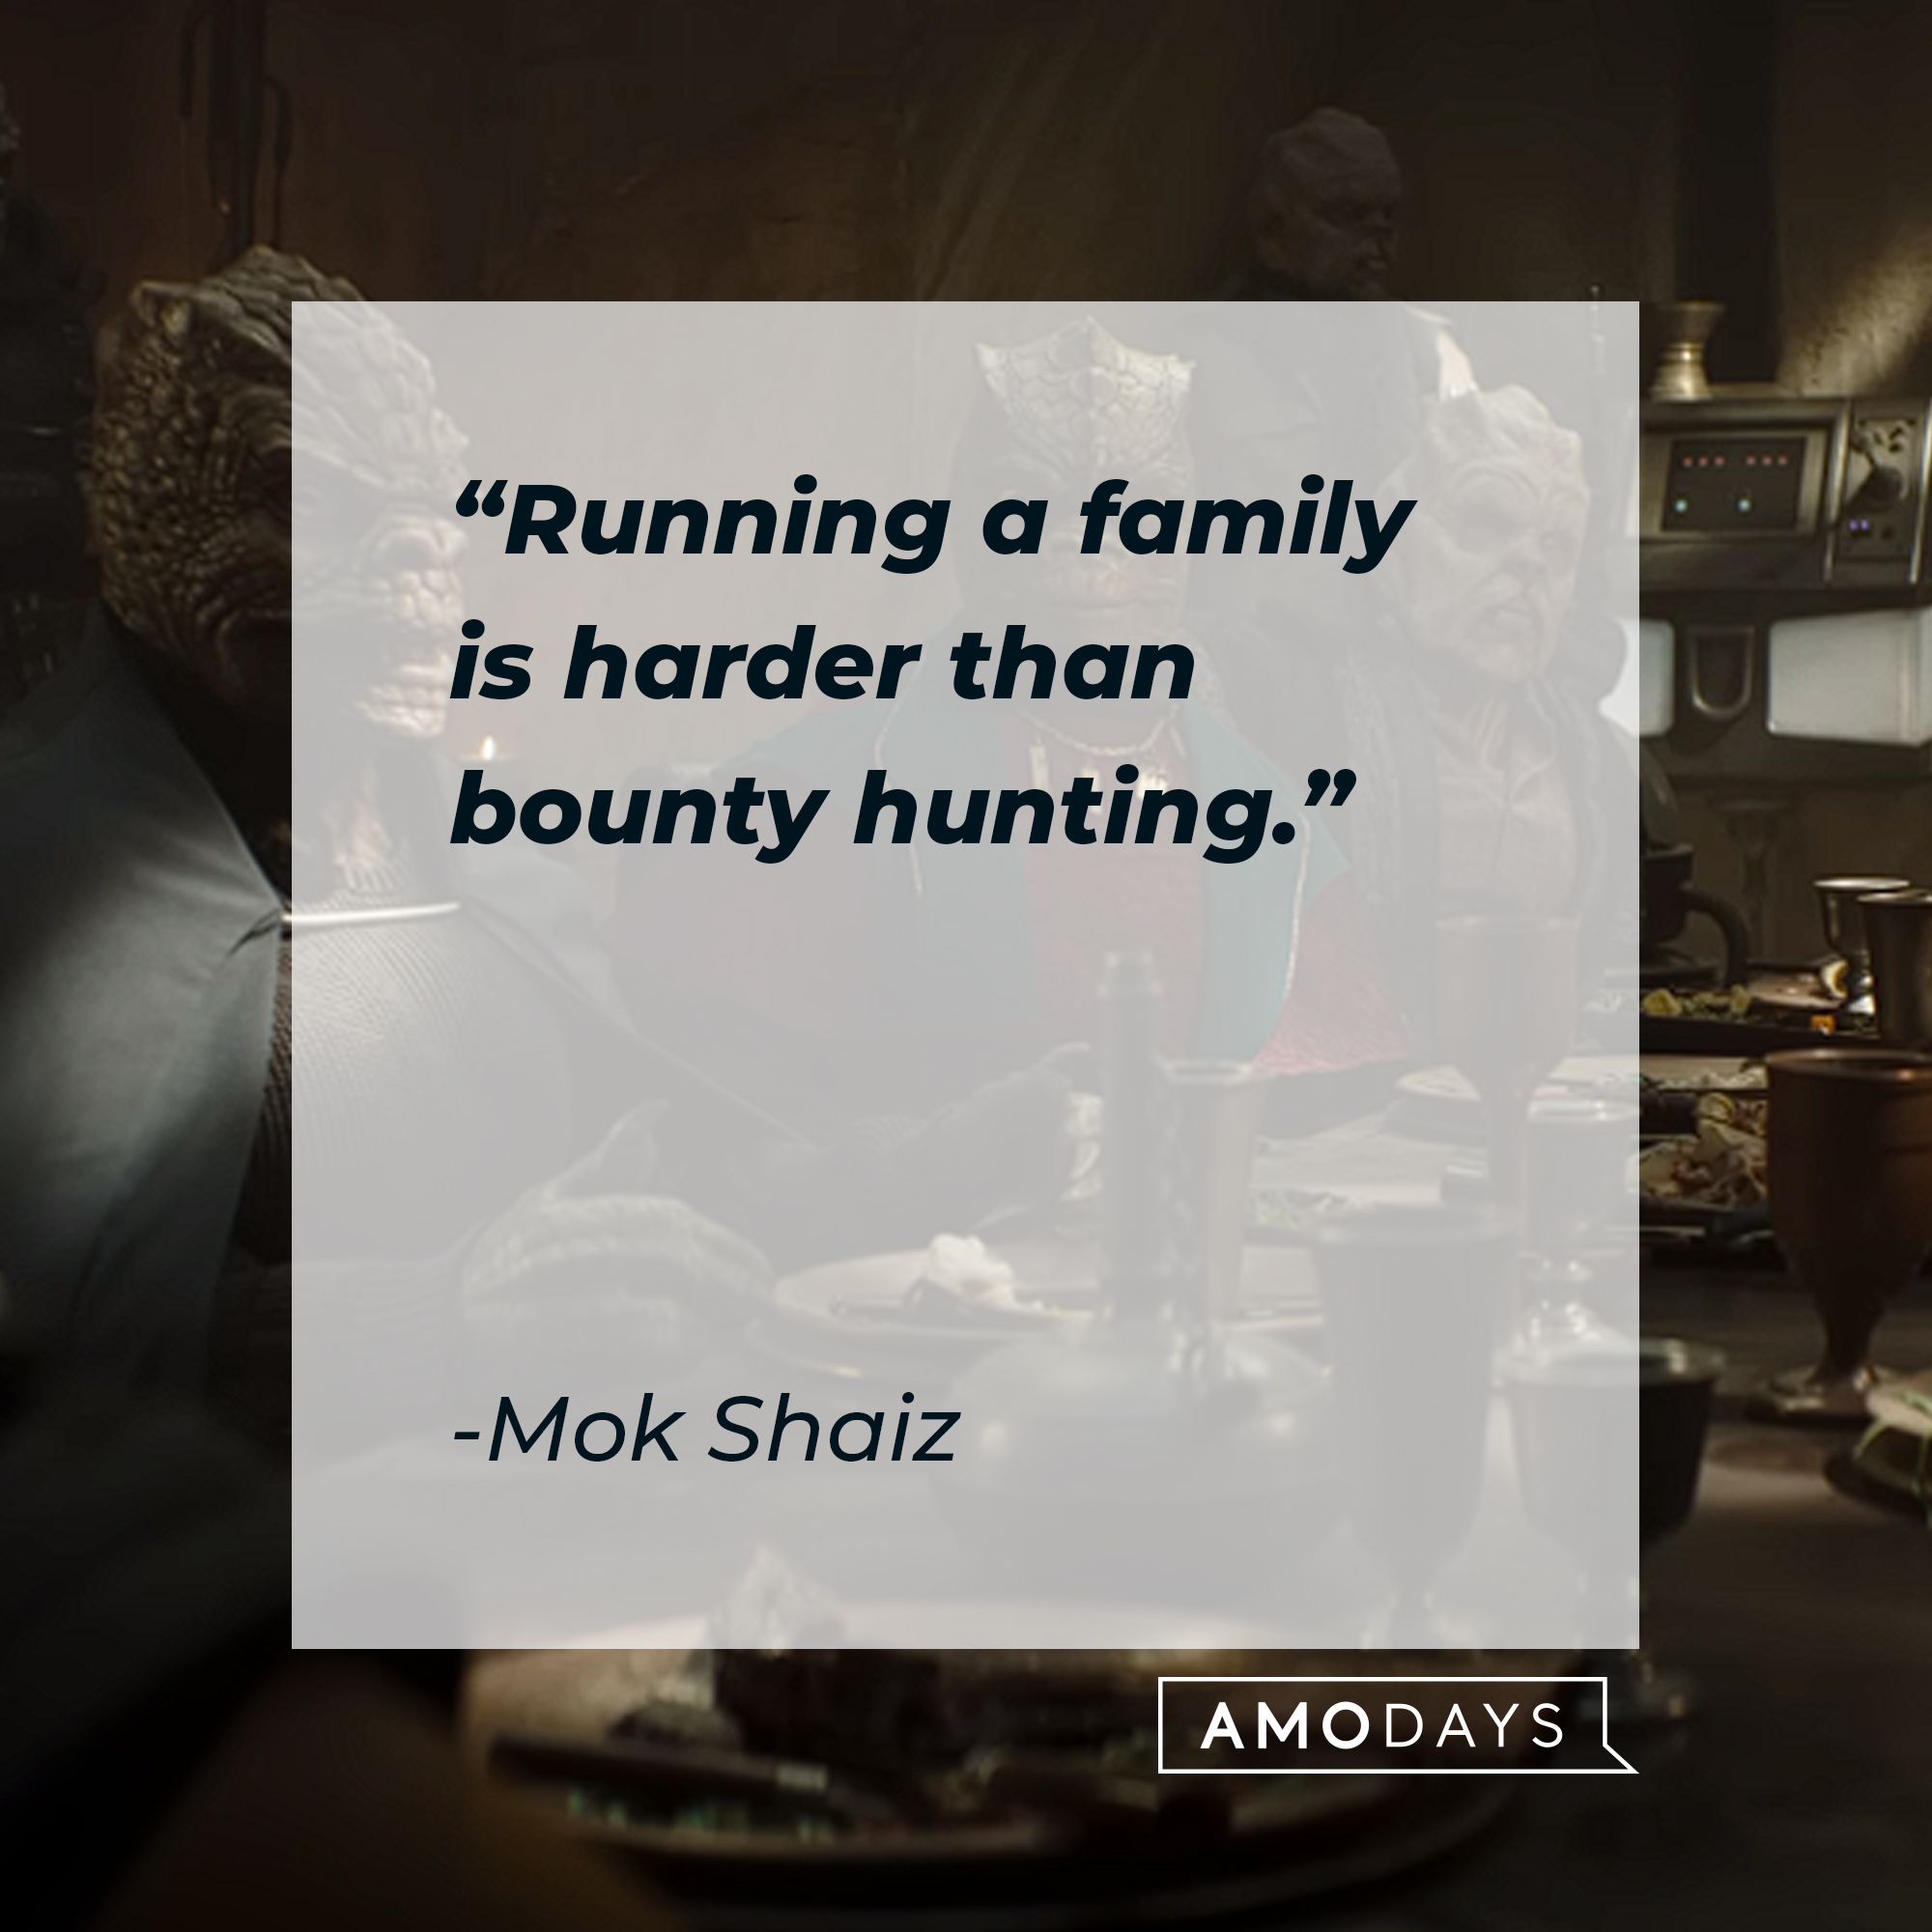 Mok Shaiz's quote: Running a family is harder than bounty hunting." | Source: youtube.com/StarWars